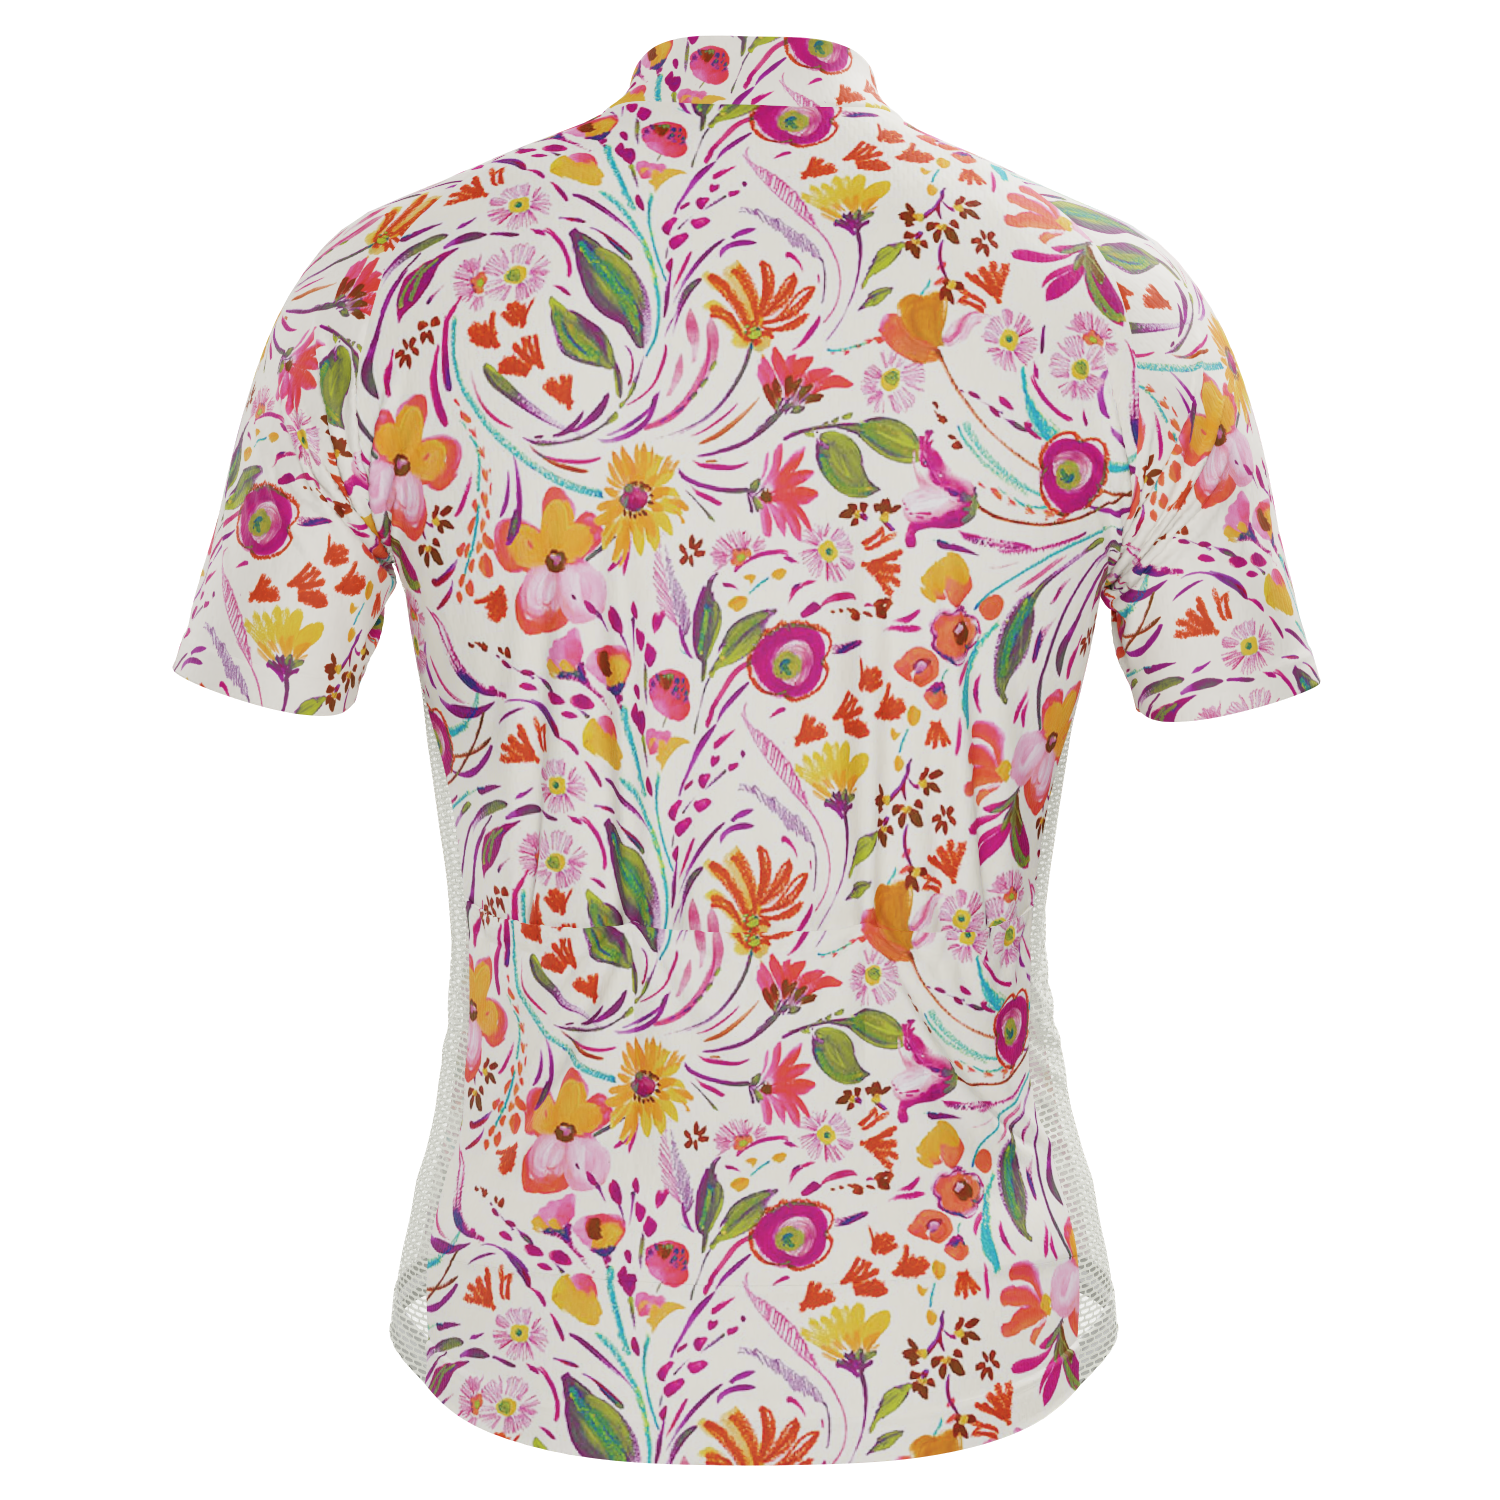 Men's Painterly Blooms Short Sleeve Cycling Jersey